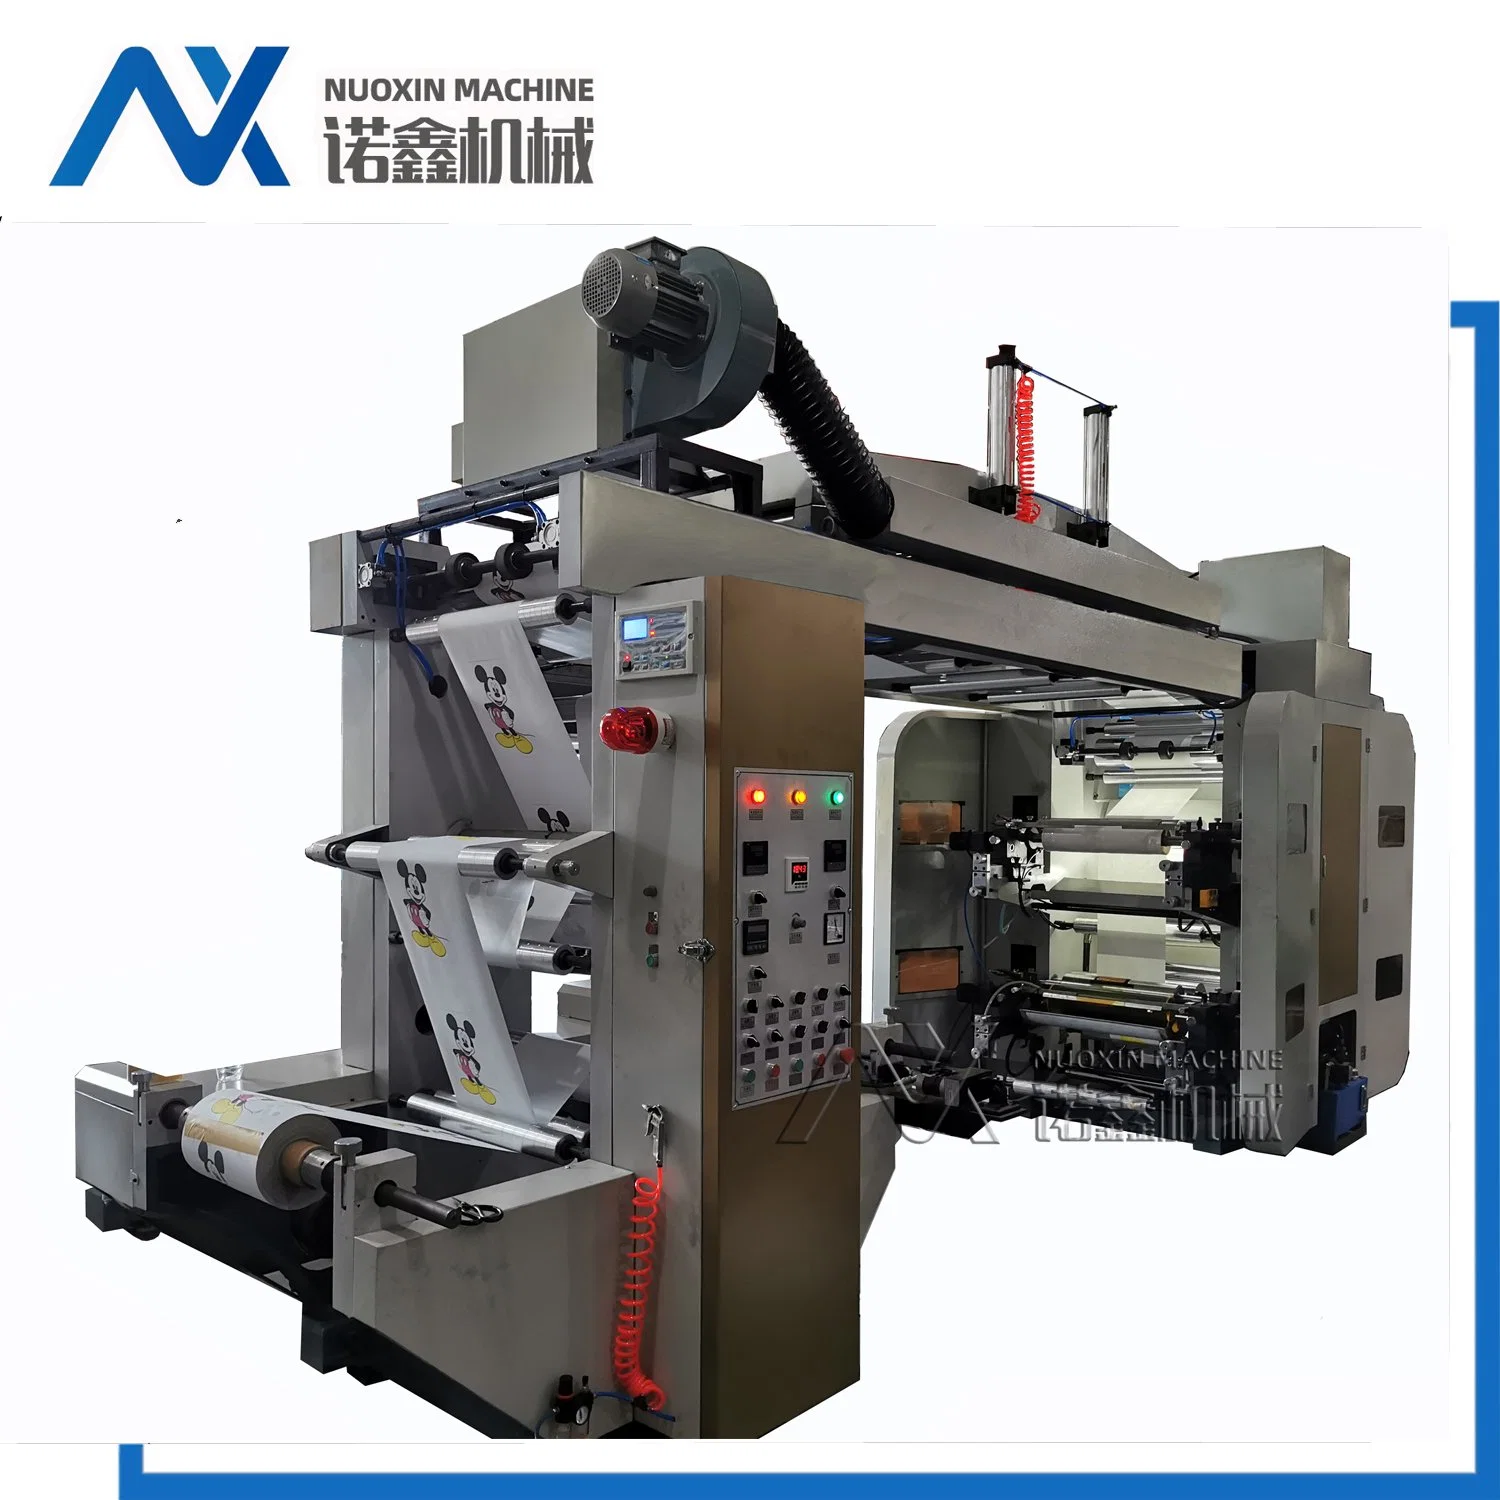 Six Colour Flexographic Printing Machine with Ceramic Anilox Roller